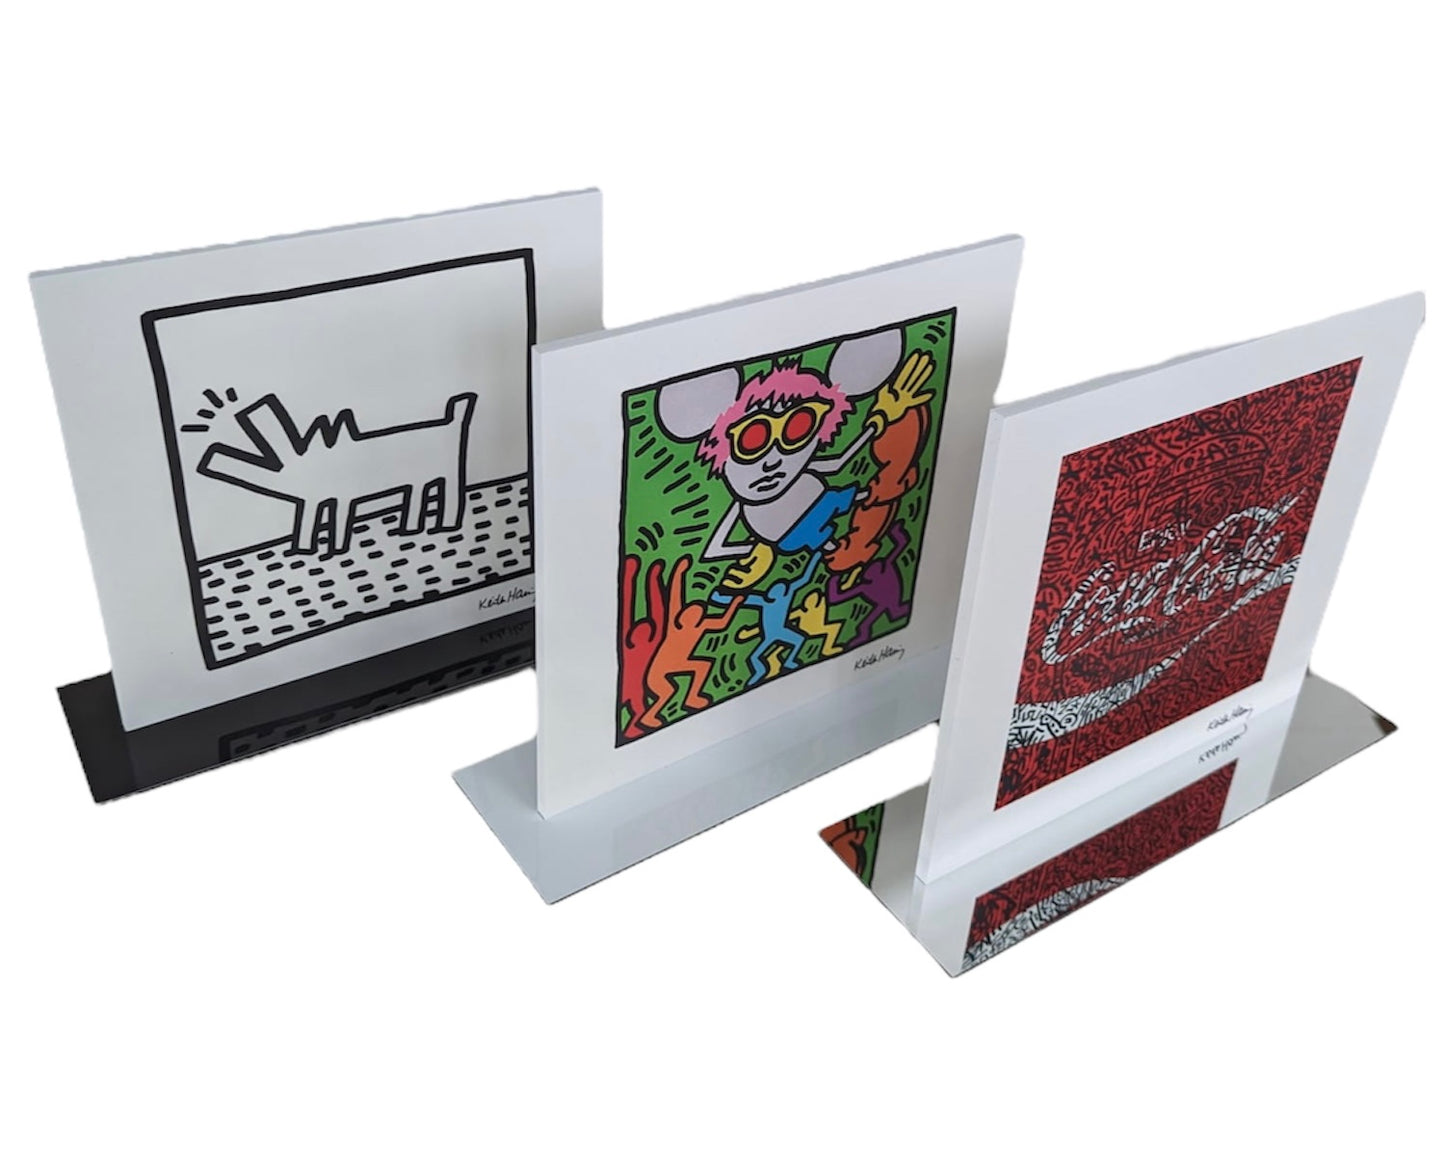 Keith Haring Set of 4 Prints on Panel - NEW BEST OFFER